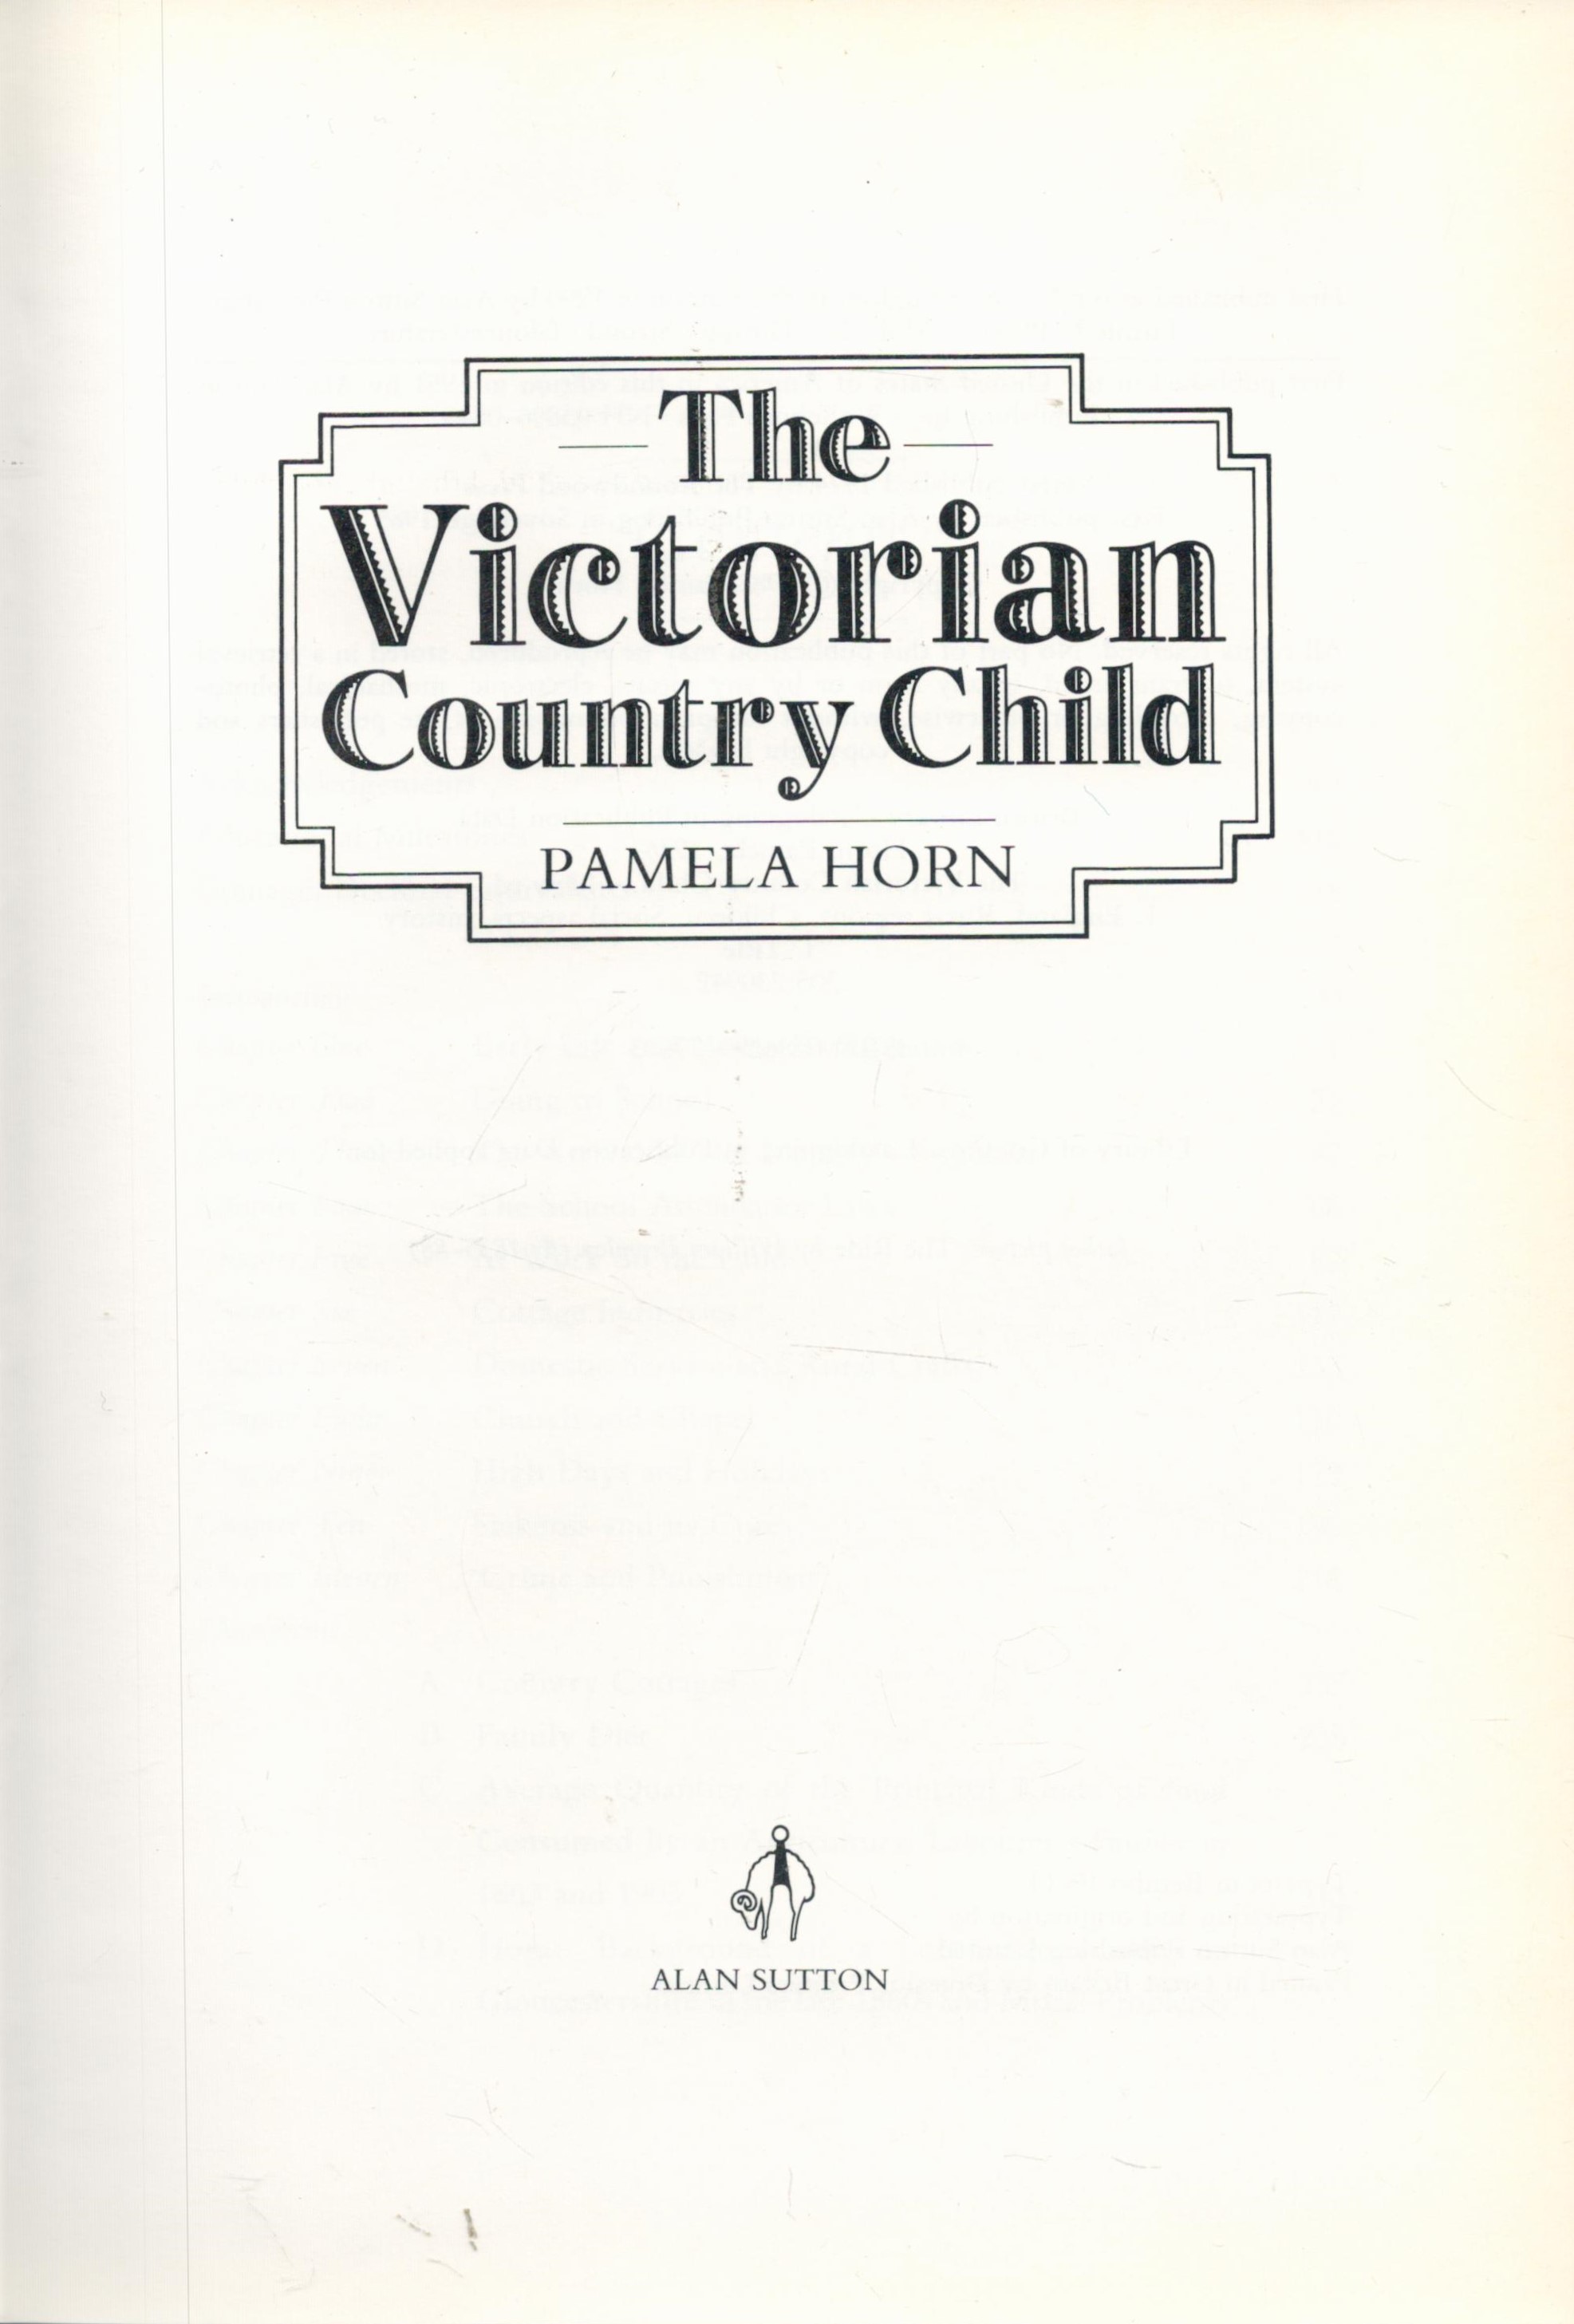 The Victorian Country Child by Pamela Horn 1990 First Edition Hardback Book with 281 pages published - Image 2 of 3